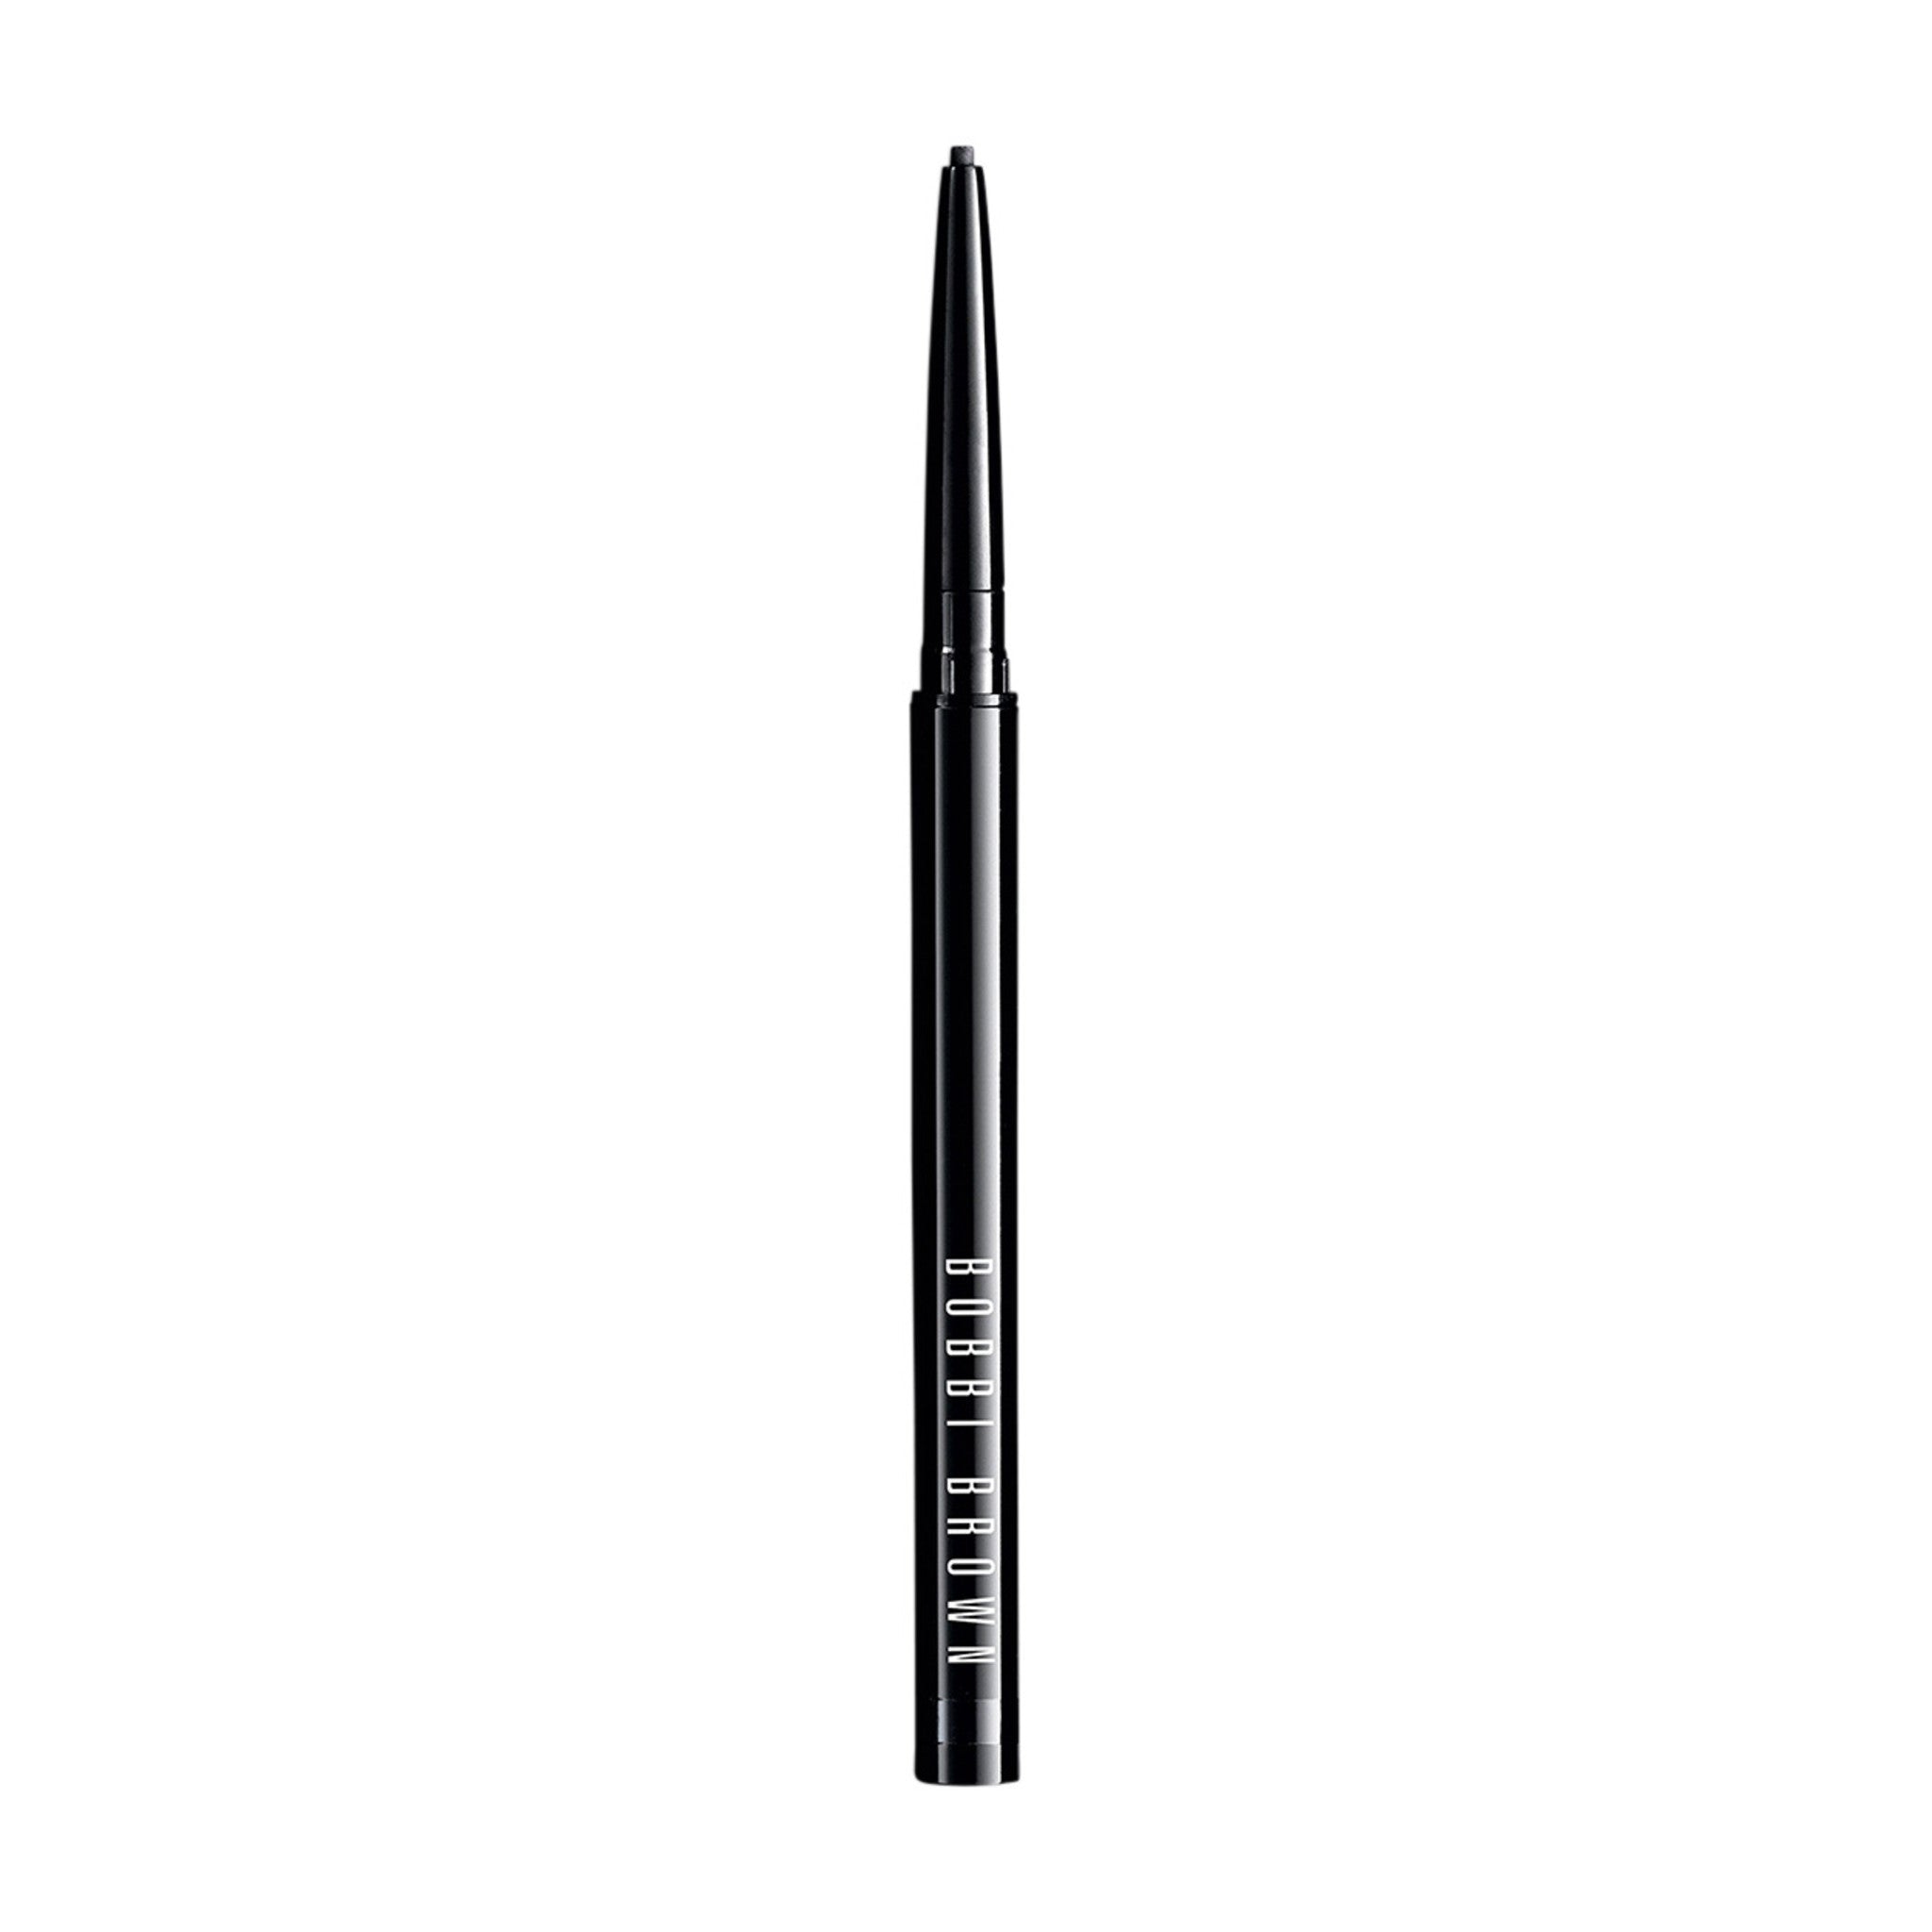 Bobbi Brown Long-Wear Waterproof Liner Color/Shade variant: Blackout main image. This product is in the color black